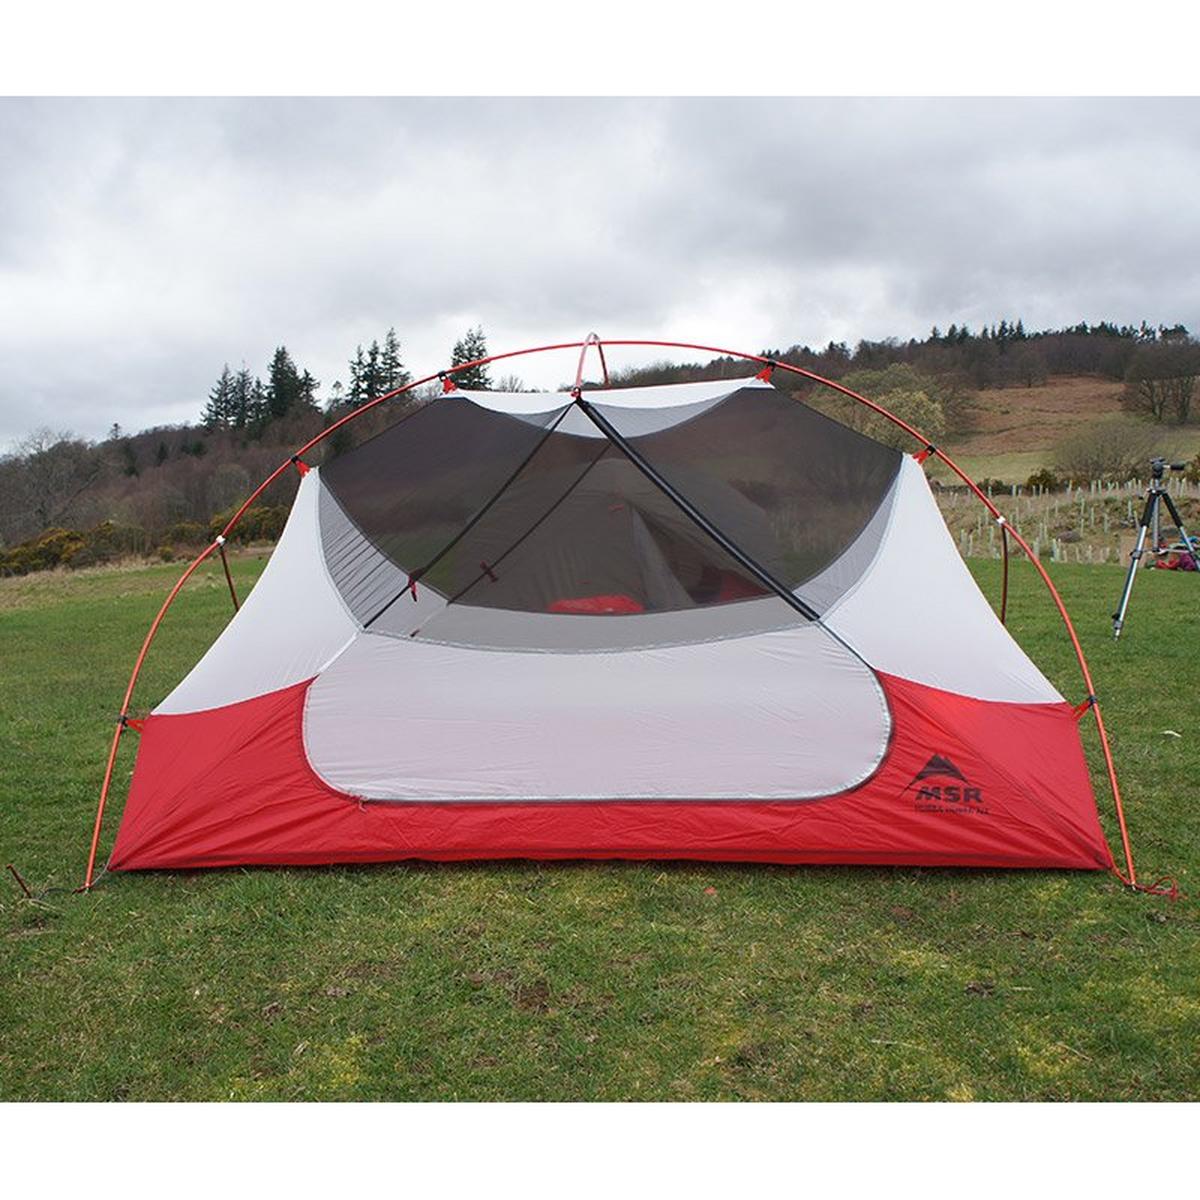 MSR Hubba Hubba NX | Two Person Tent